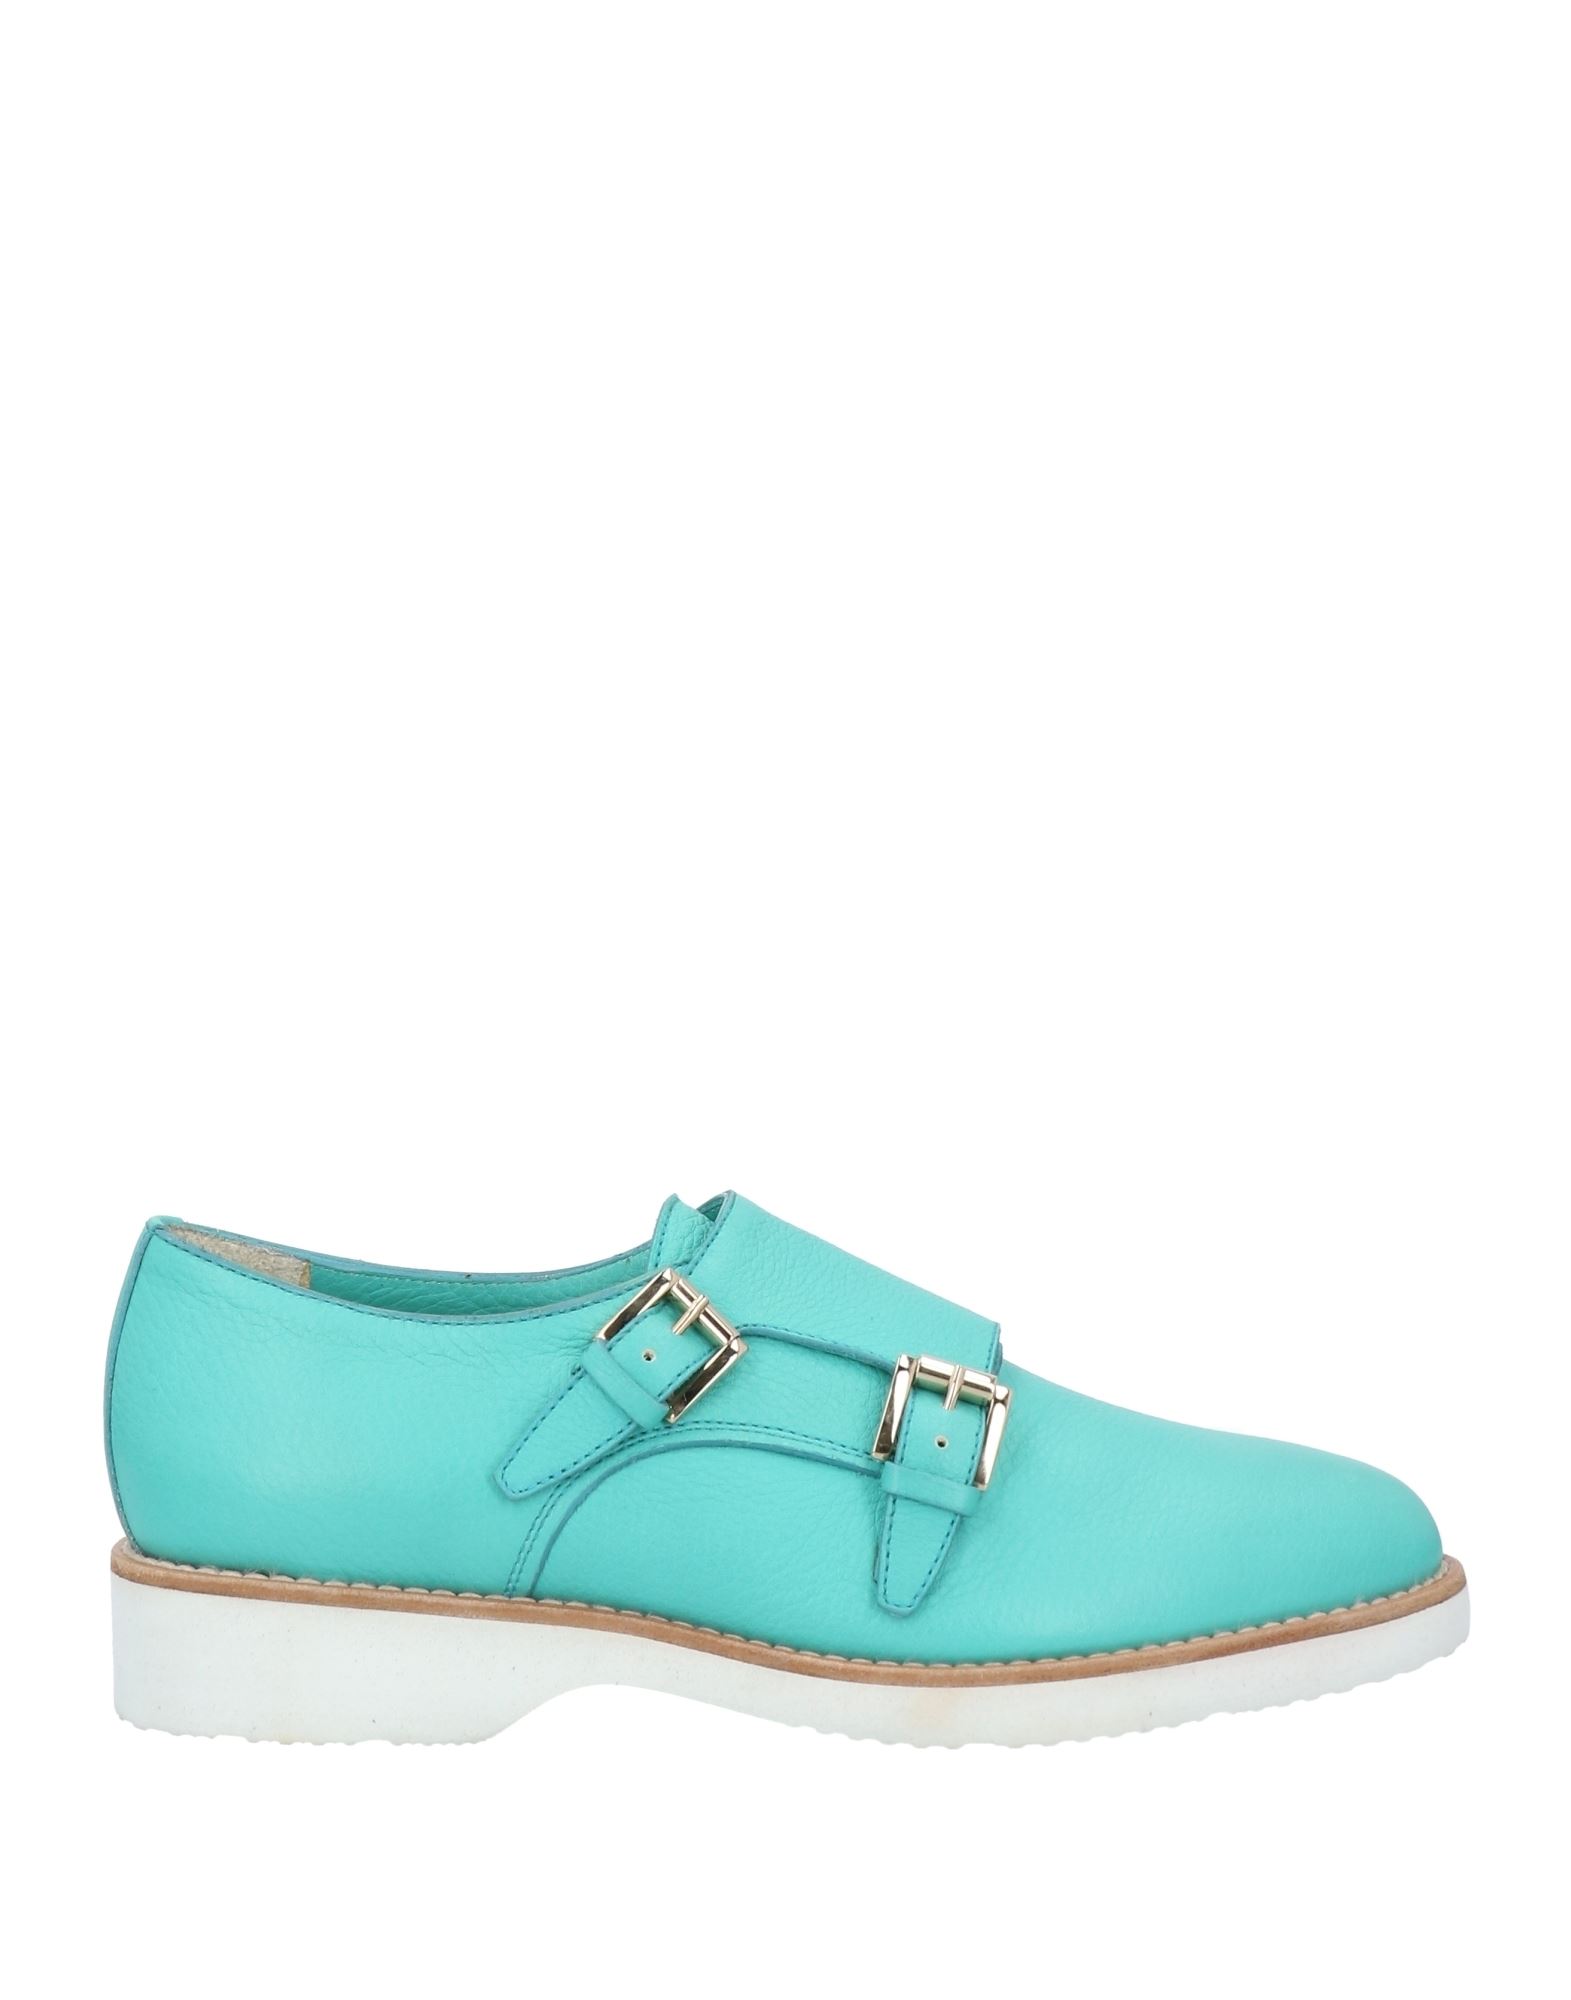 Santoni Loafers In Turquoise